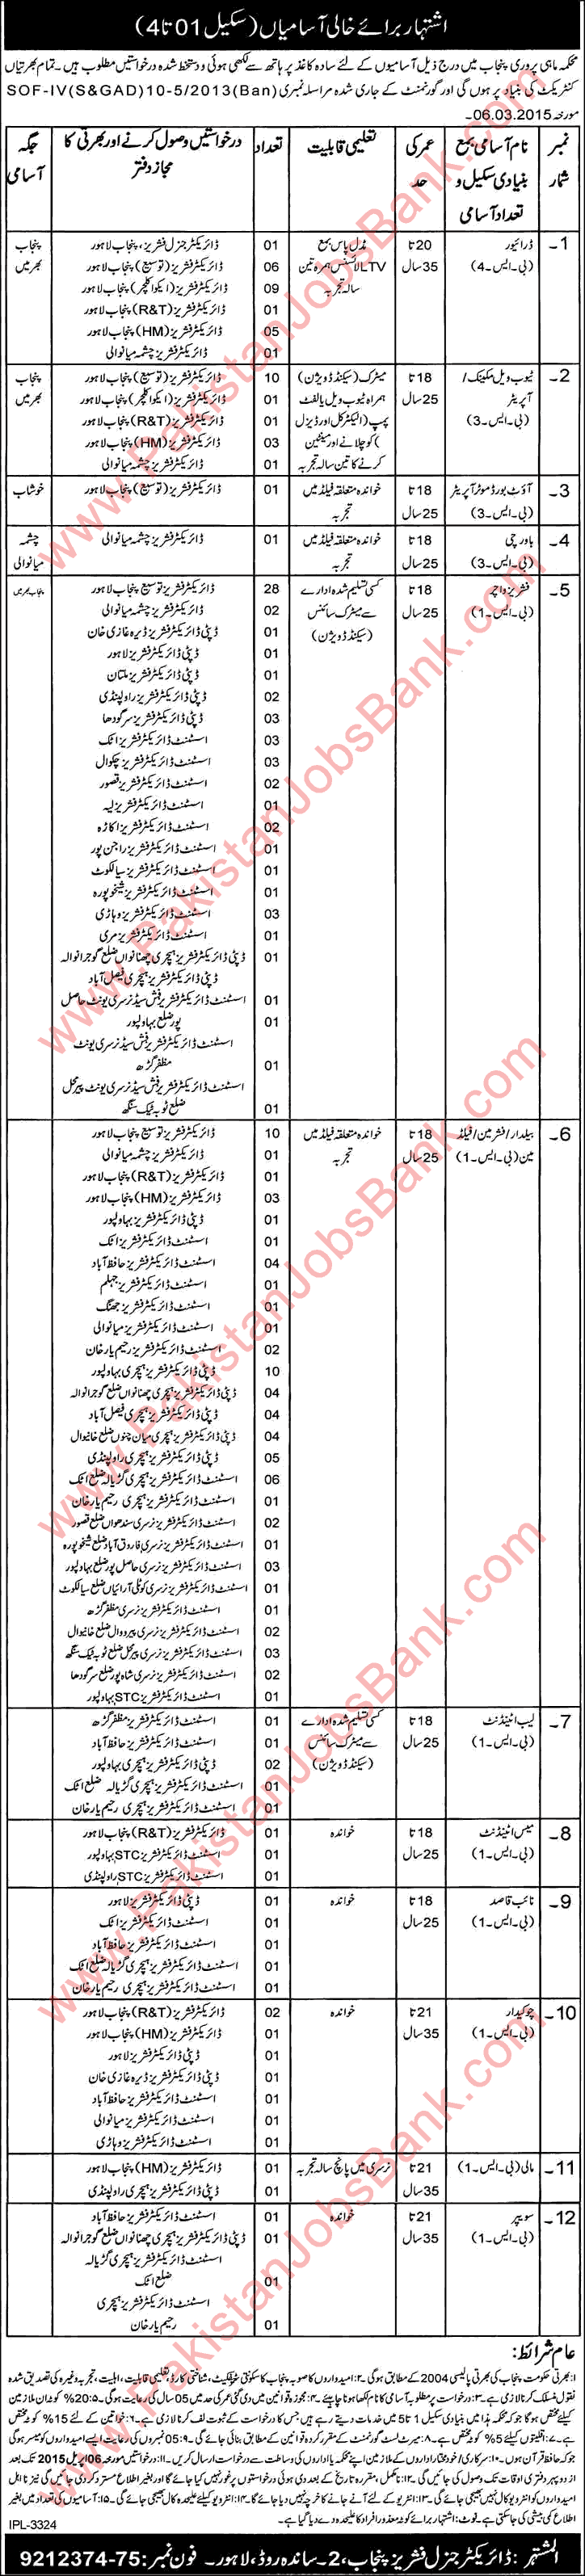 Fisheries Department Punjab Jobs 2015 March BPS-1 to BPS-4 Latest